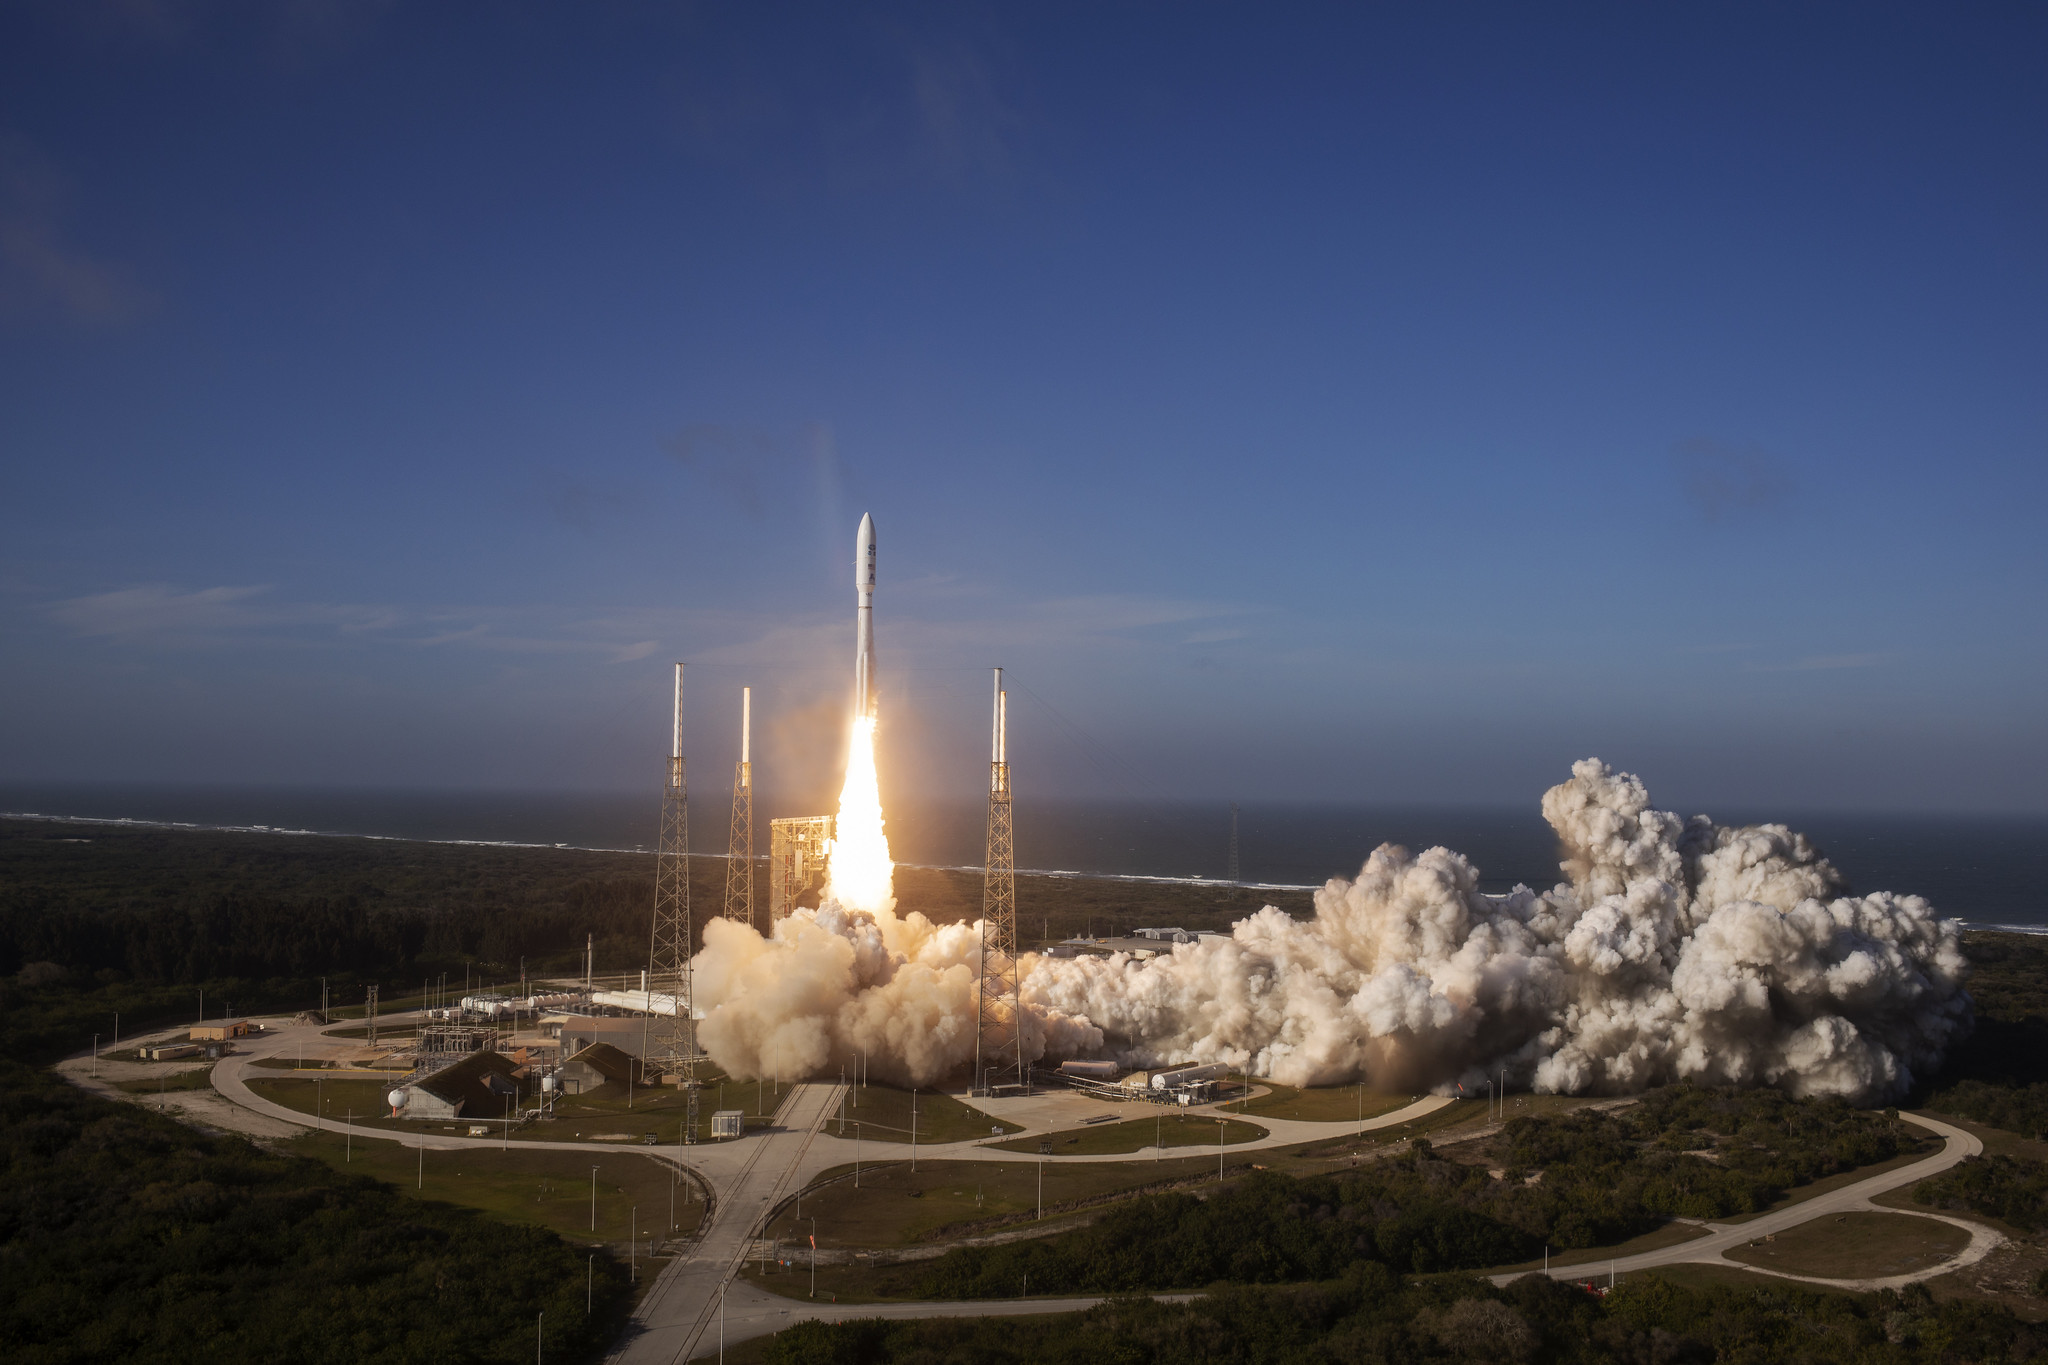 GOES-T, now GOES-18, launches from Kennedy Space Center in Cape Canaveral, FL, on March 1, 2022.